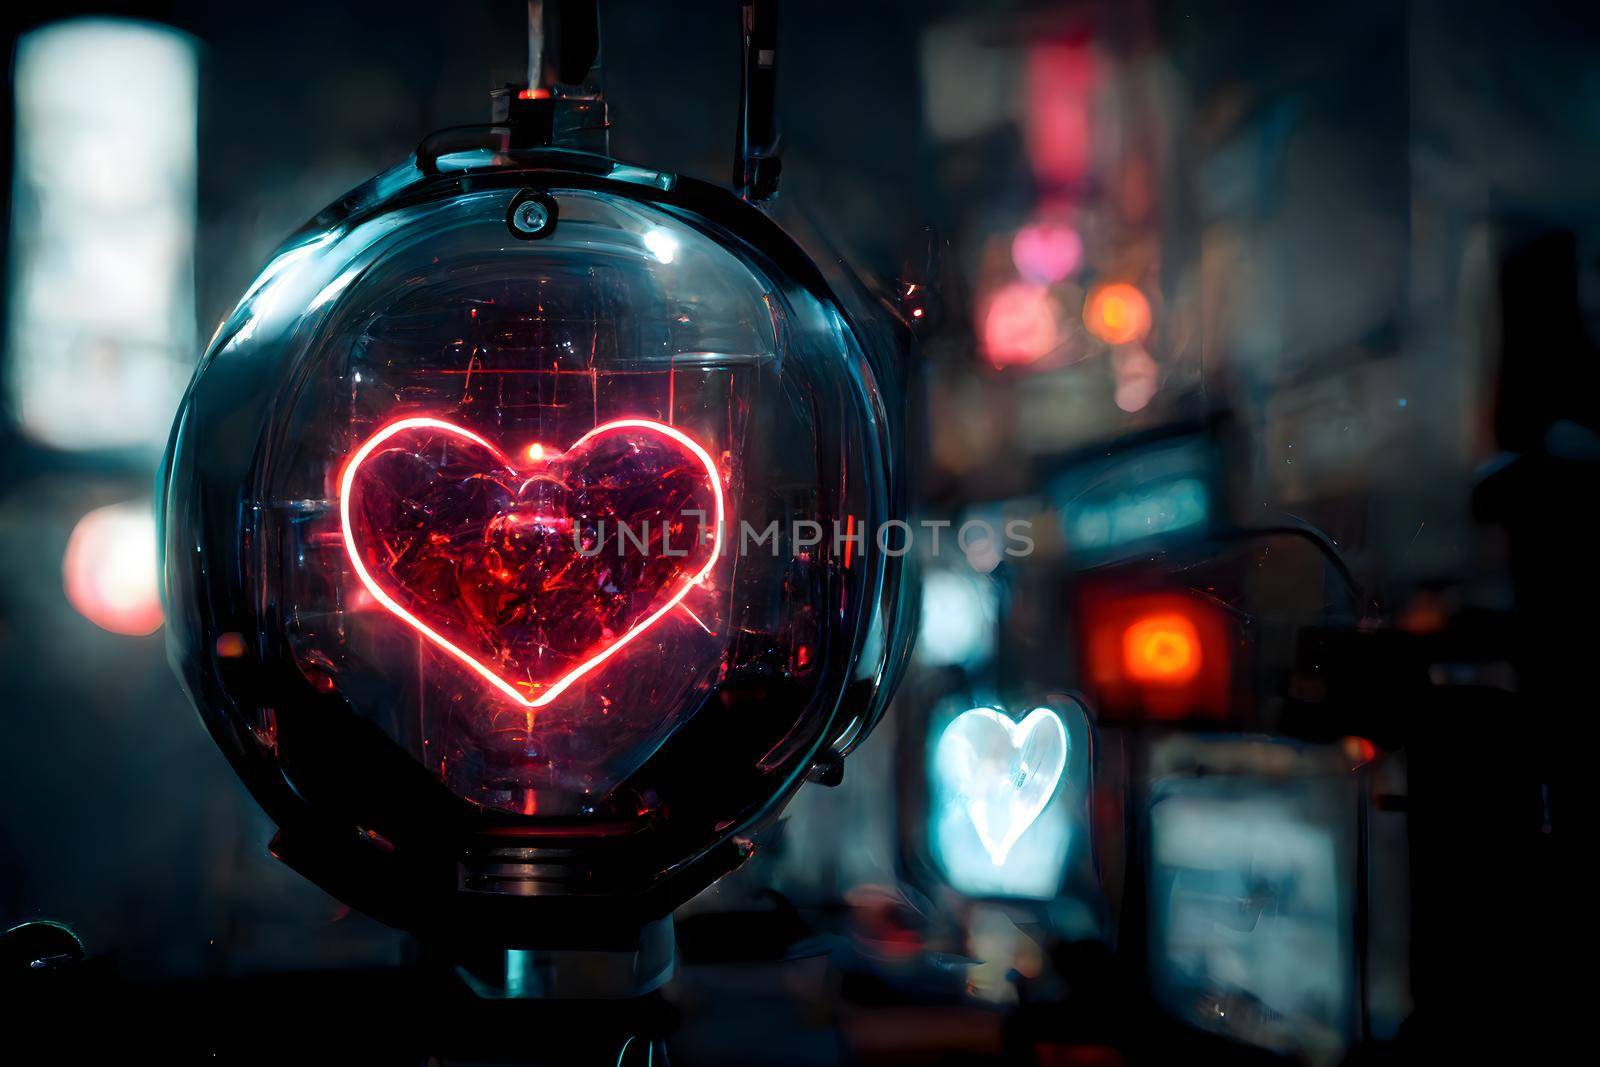 cyberpunk neon shiny and glowing hearts on gray background, neural network generated art painting by z1b